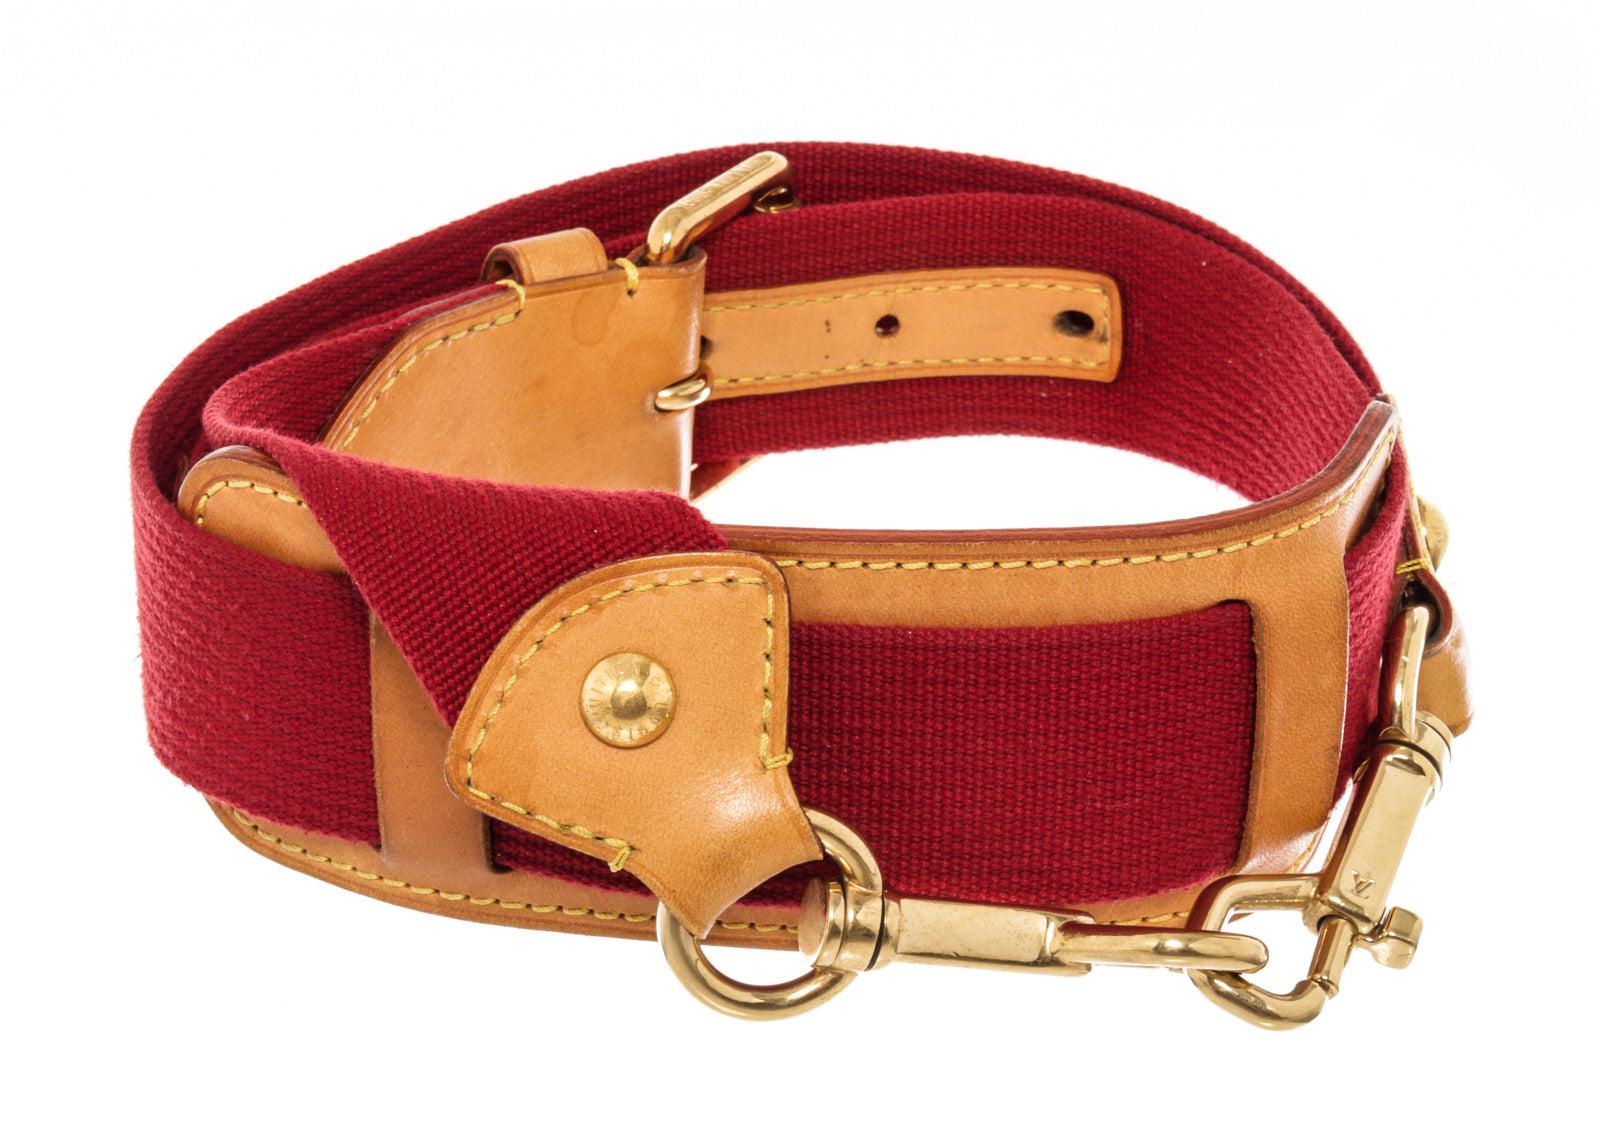 Louis Vuitton Red Leather Adjustable Strap with leather, tan vachetta leather, turn lock closure.
61205MSC